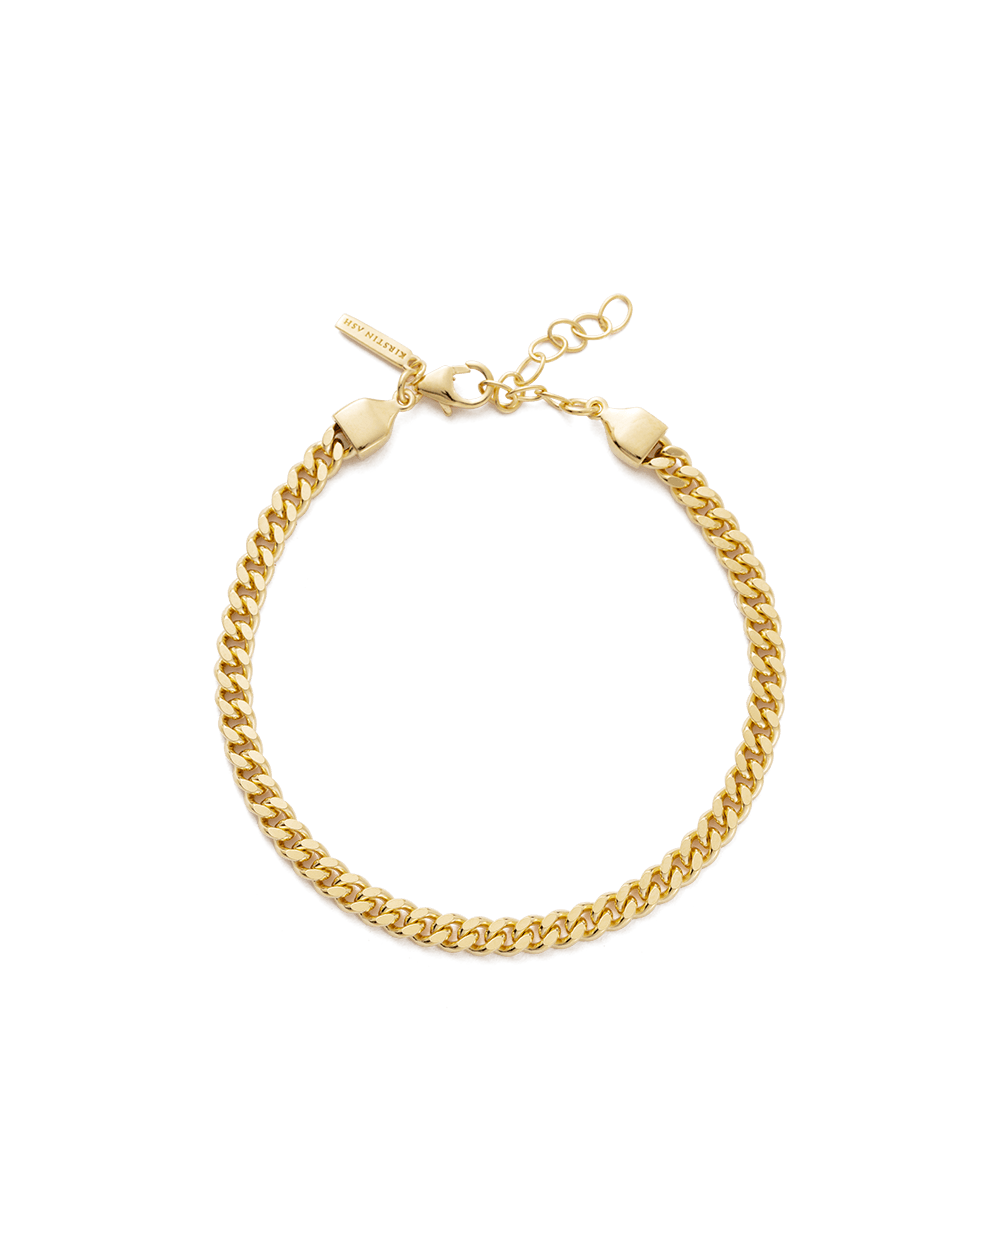 GLOW CHAIN BRACELET (18K GOLD PLATED) - IMAGE 1